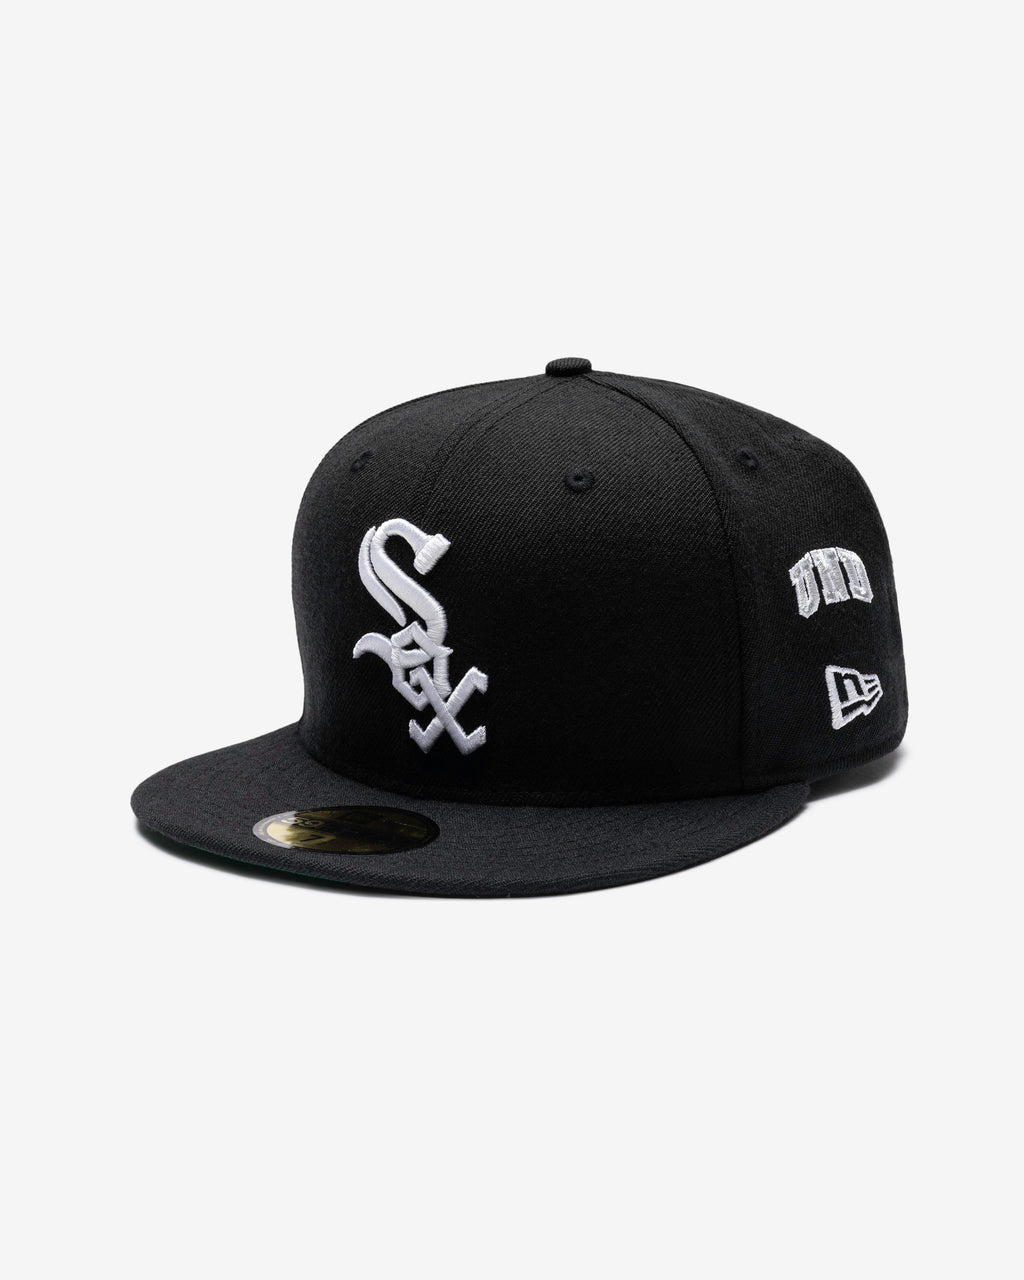 UNDEFEATED X NE X MLB FITTED - CHICAGO WHITE SOX